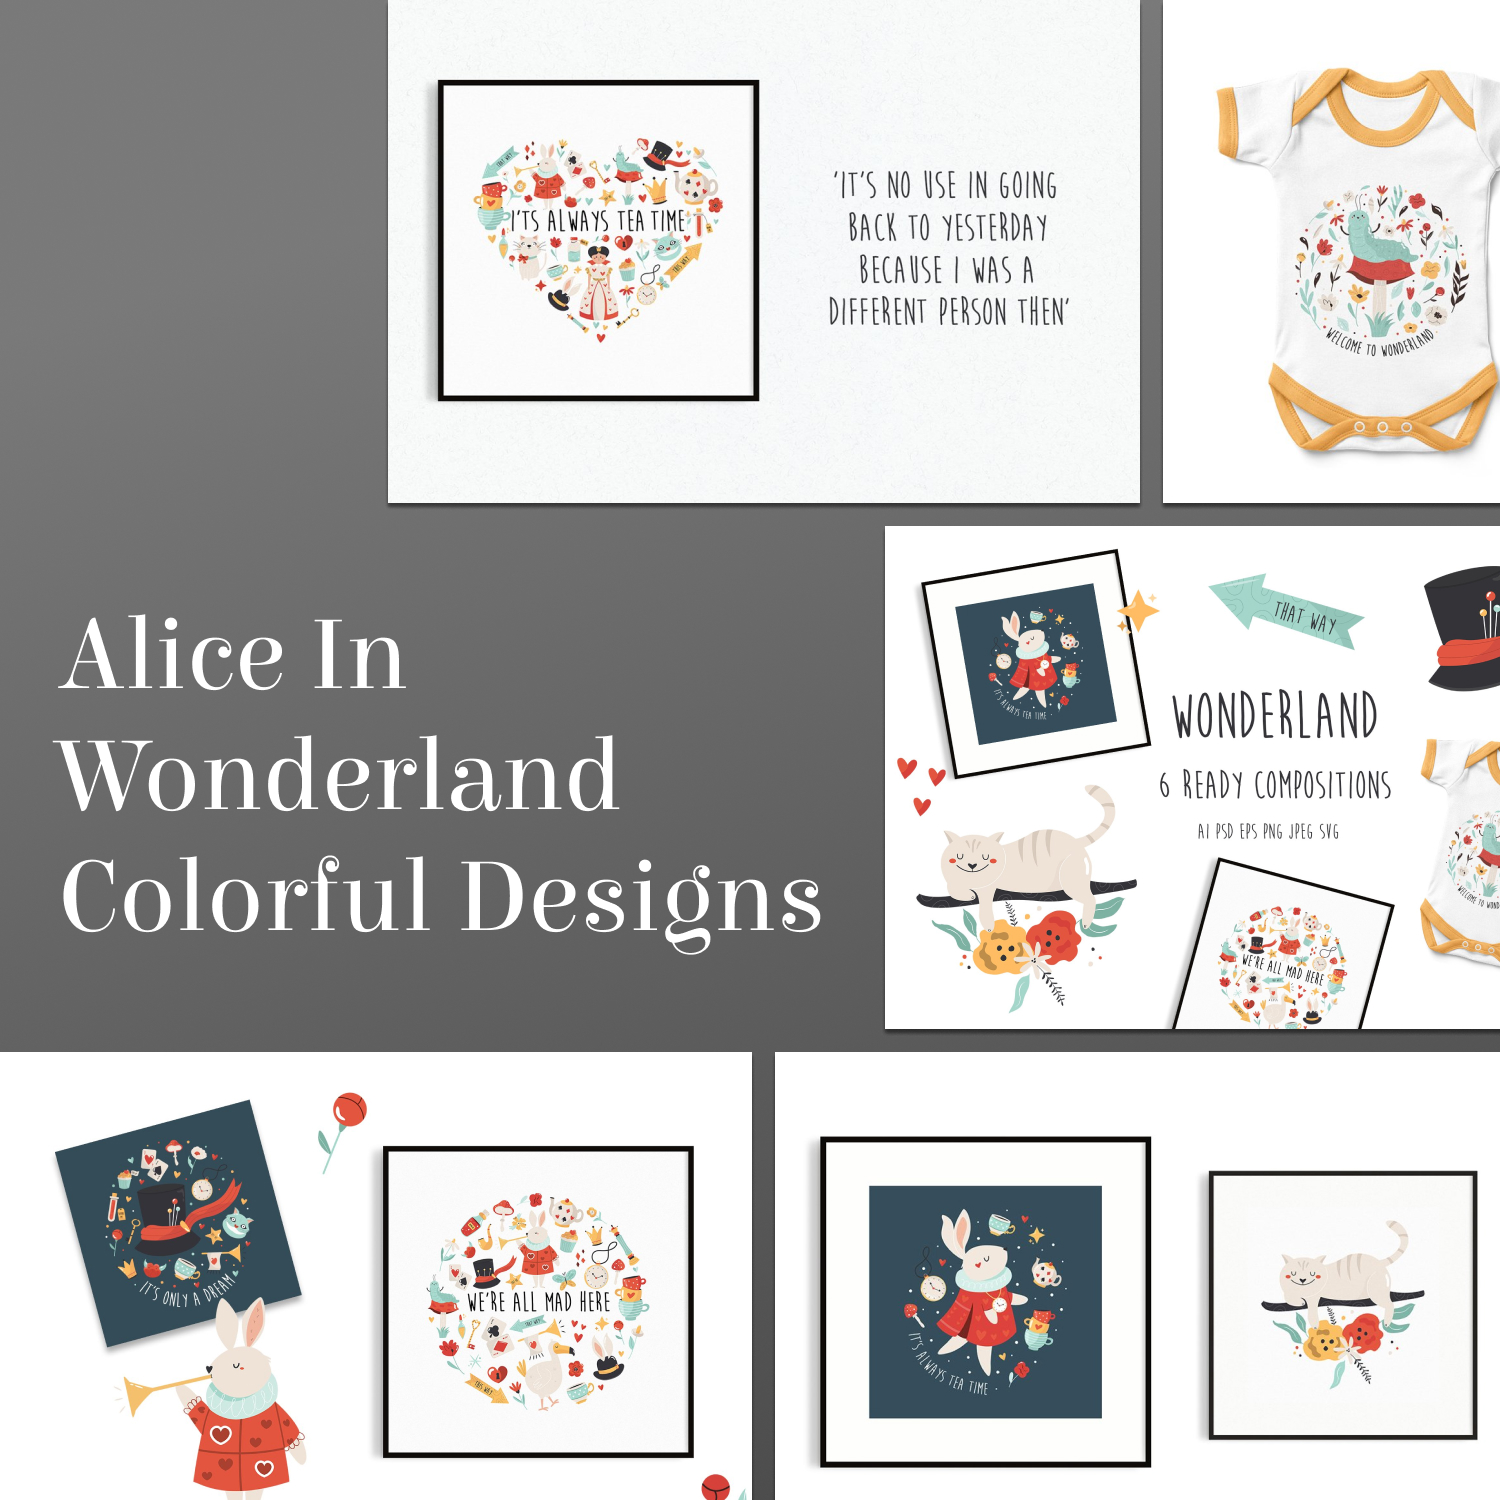 Alice in wonderland colorful designs preview.